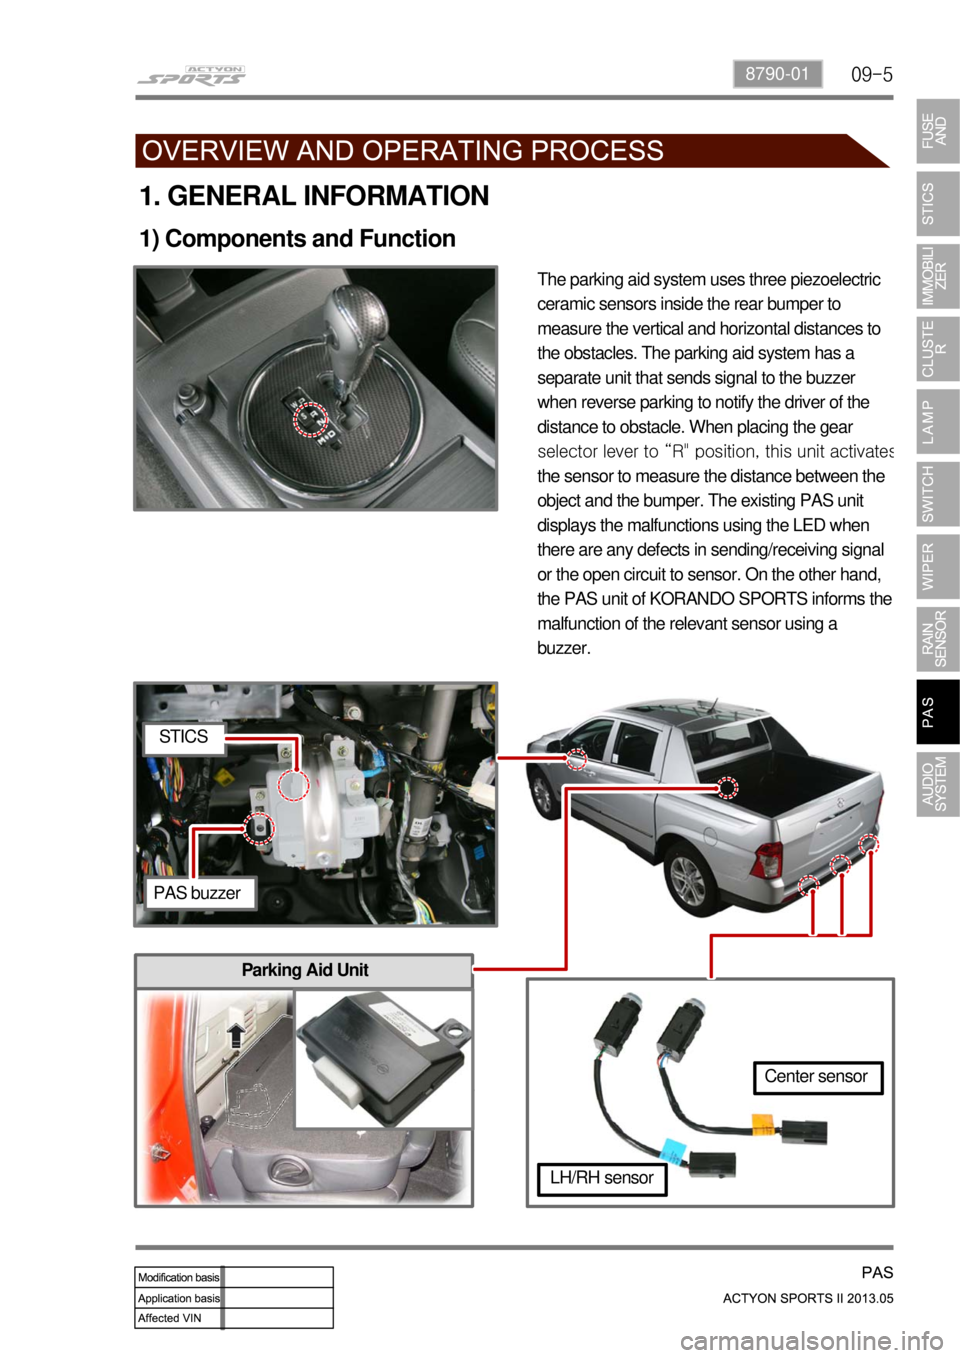 SSANGYONG NEW ACTYON SPORTS 2013  Service Manual 09-58790-01
Parking Aid Unit
1. GENERAL INFORMATION
1) Components and Function
The parking aid system uses three piezoelectric 
ceramic sensors inside the rear bumper to 
measure the vertical and hori